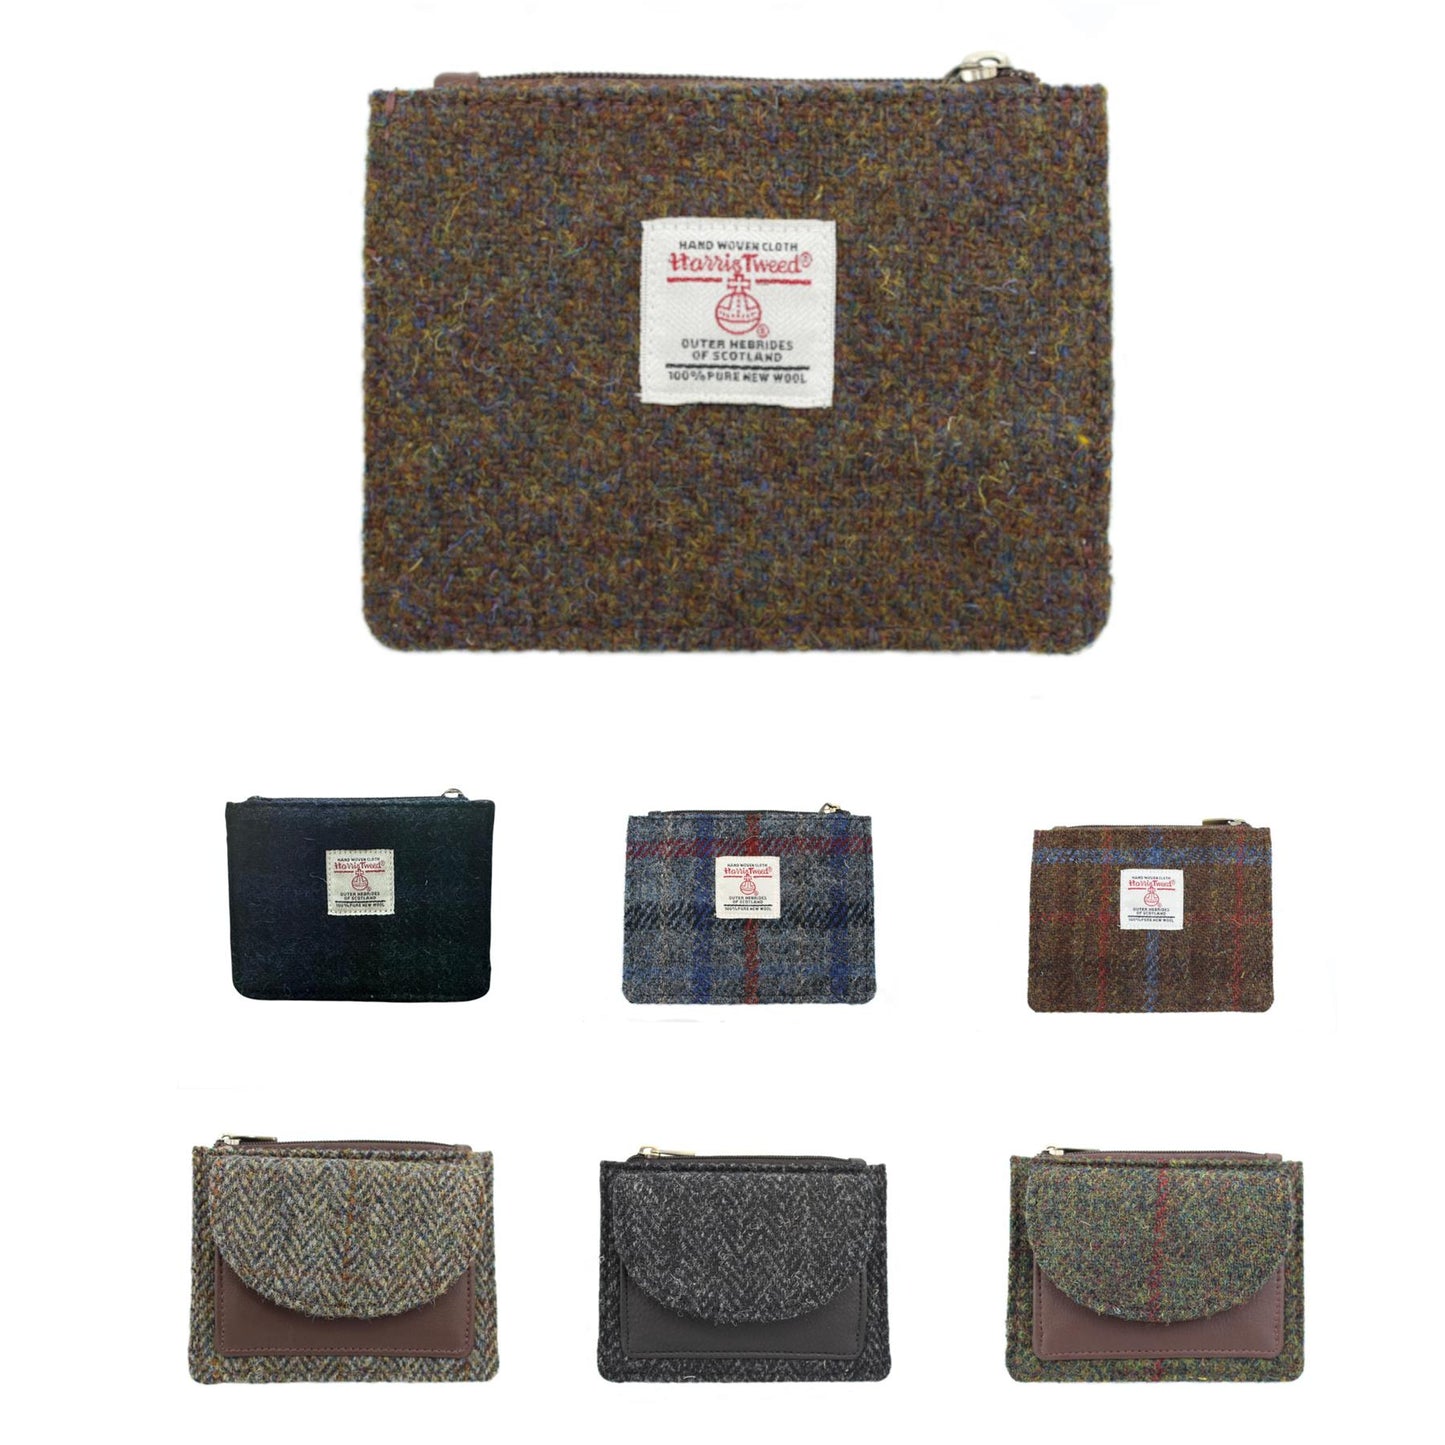 Rory Harris Tweed Coin Card Wallet ZB086